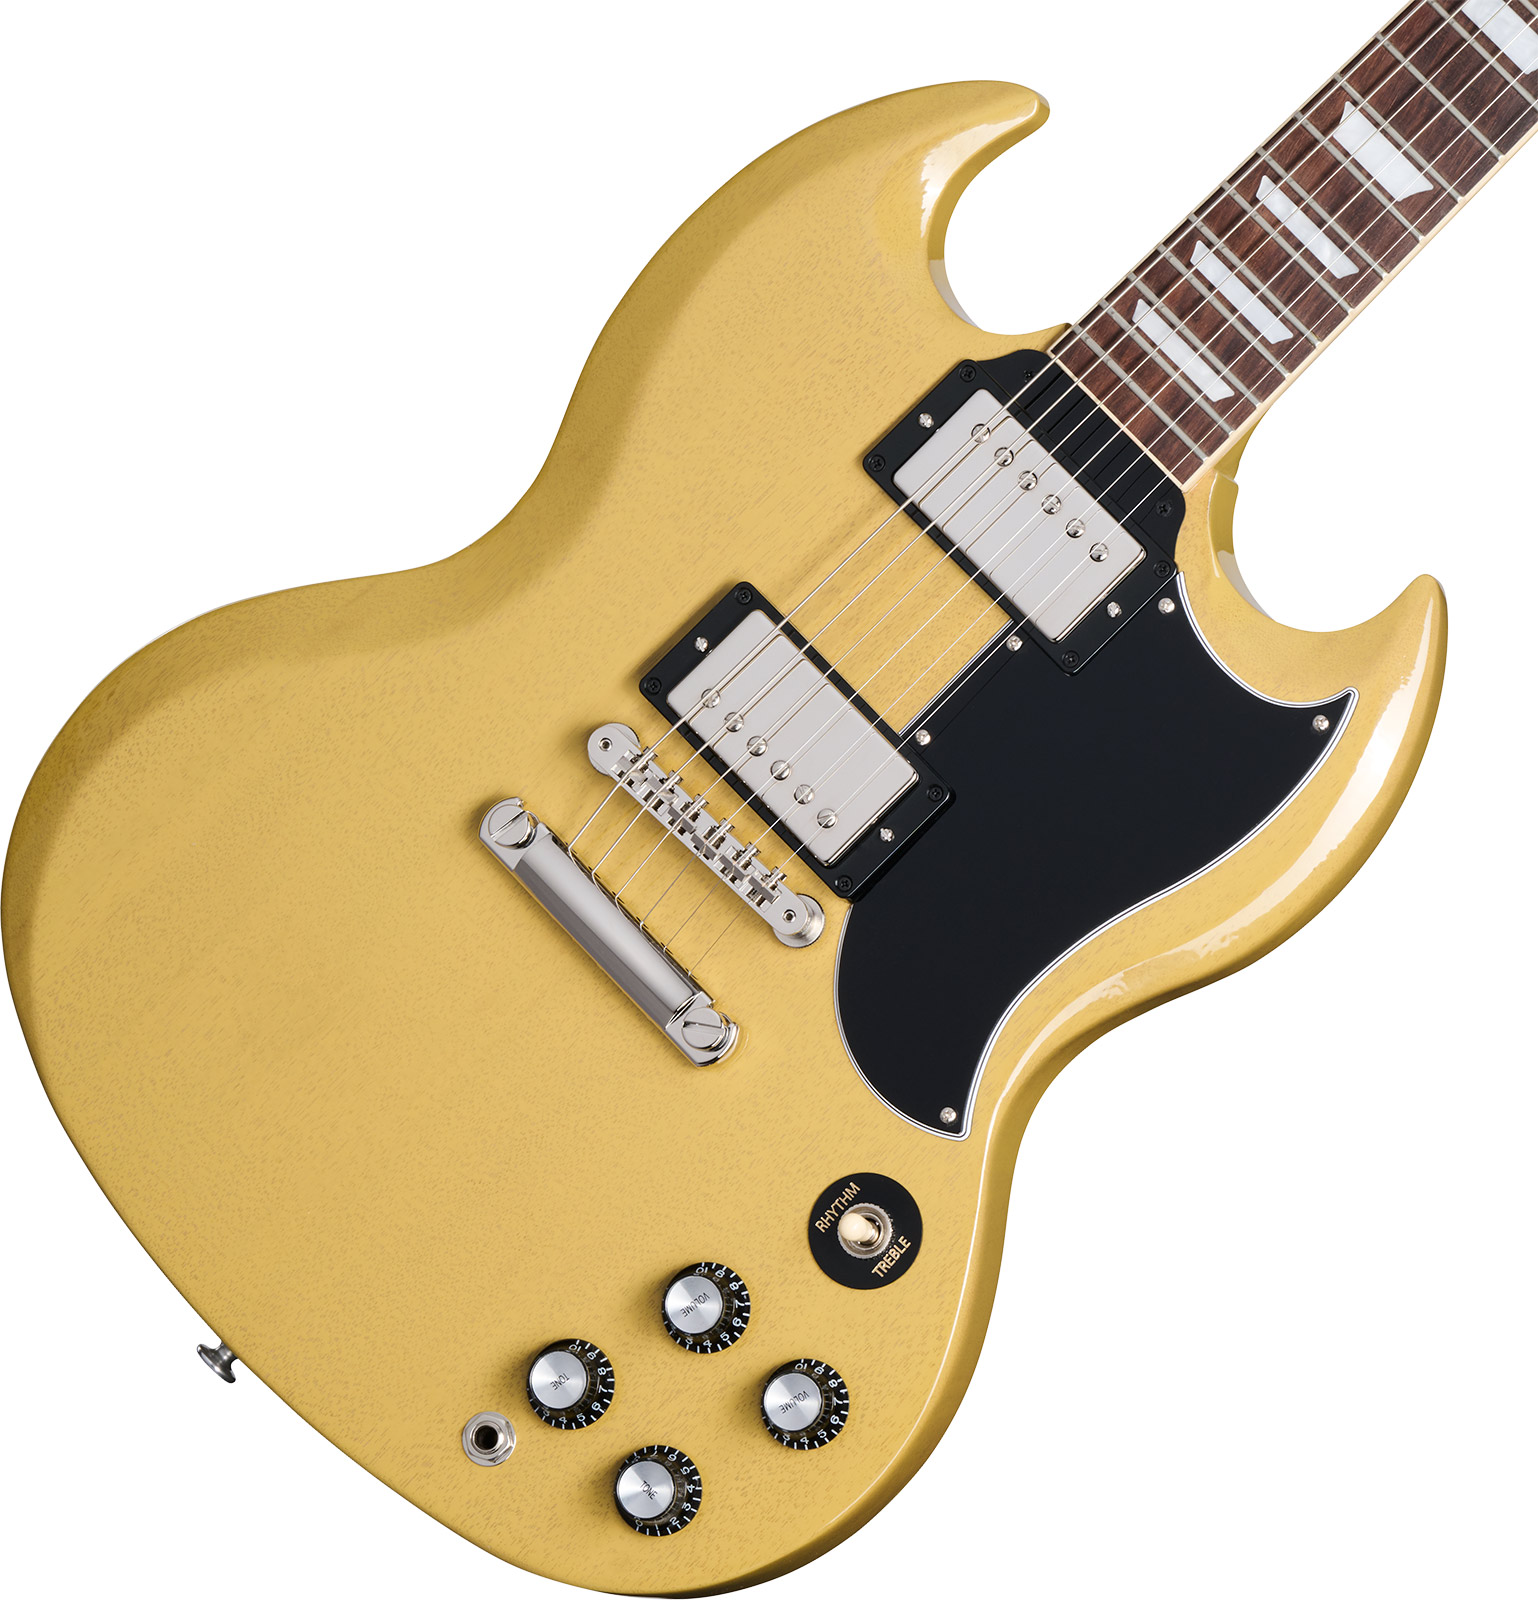 Gibson Sg Standard 1961 Custom Color 2h Ht Rw - Tv Yellow - Double cut electric guitar - Variation 3